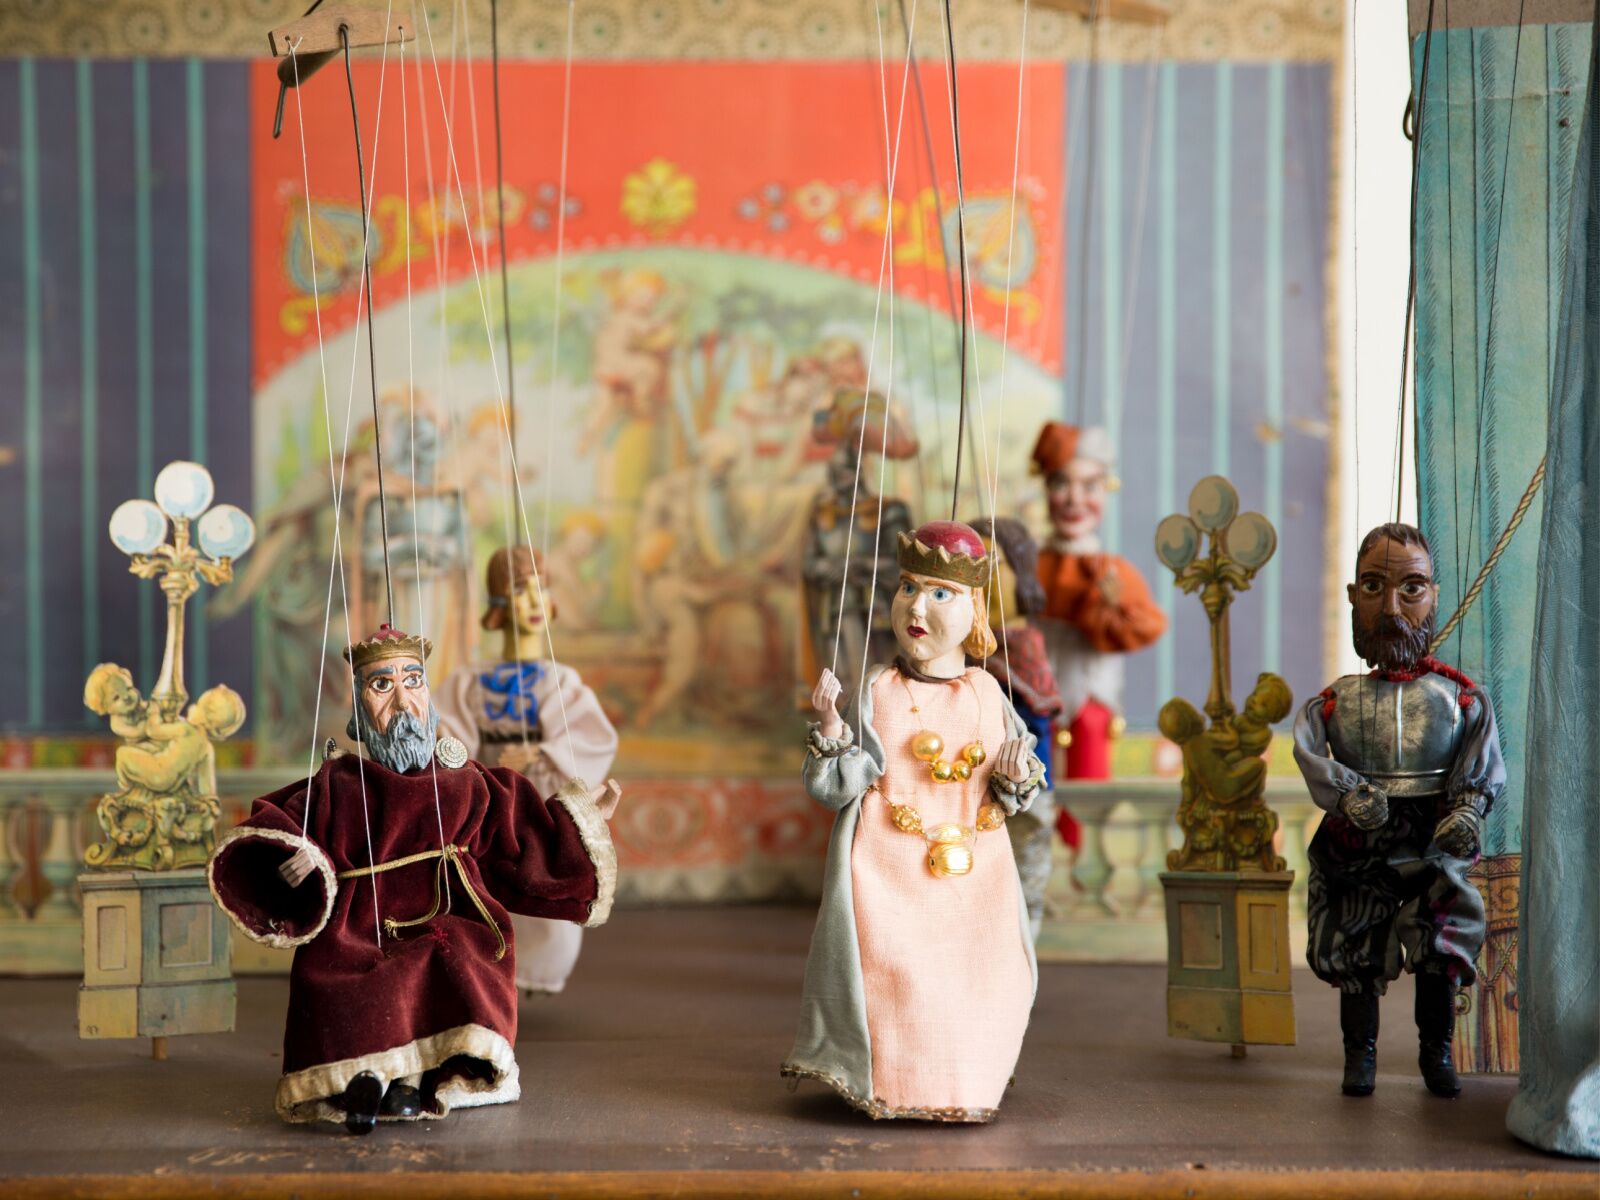 Marionette puppets akin to those at the Berlin puppet museum 